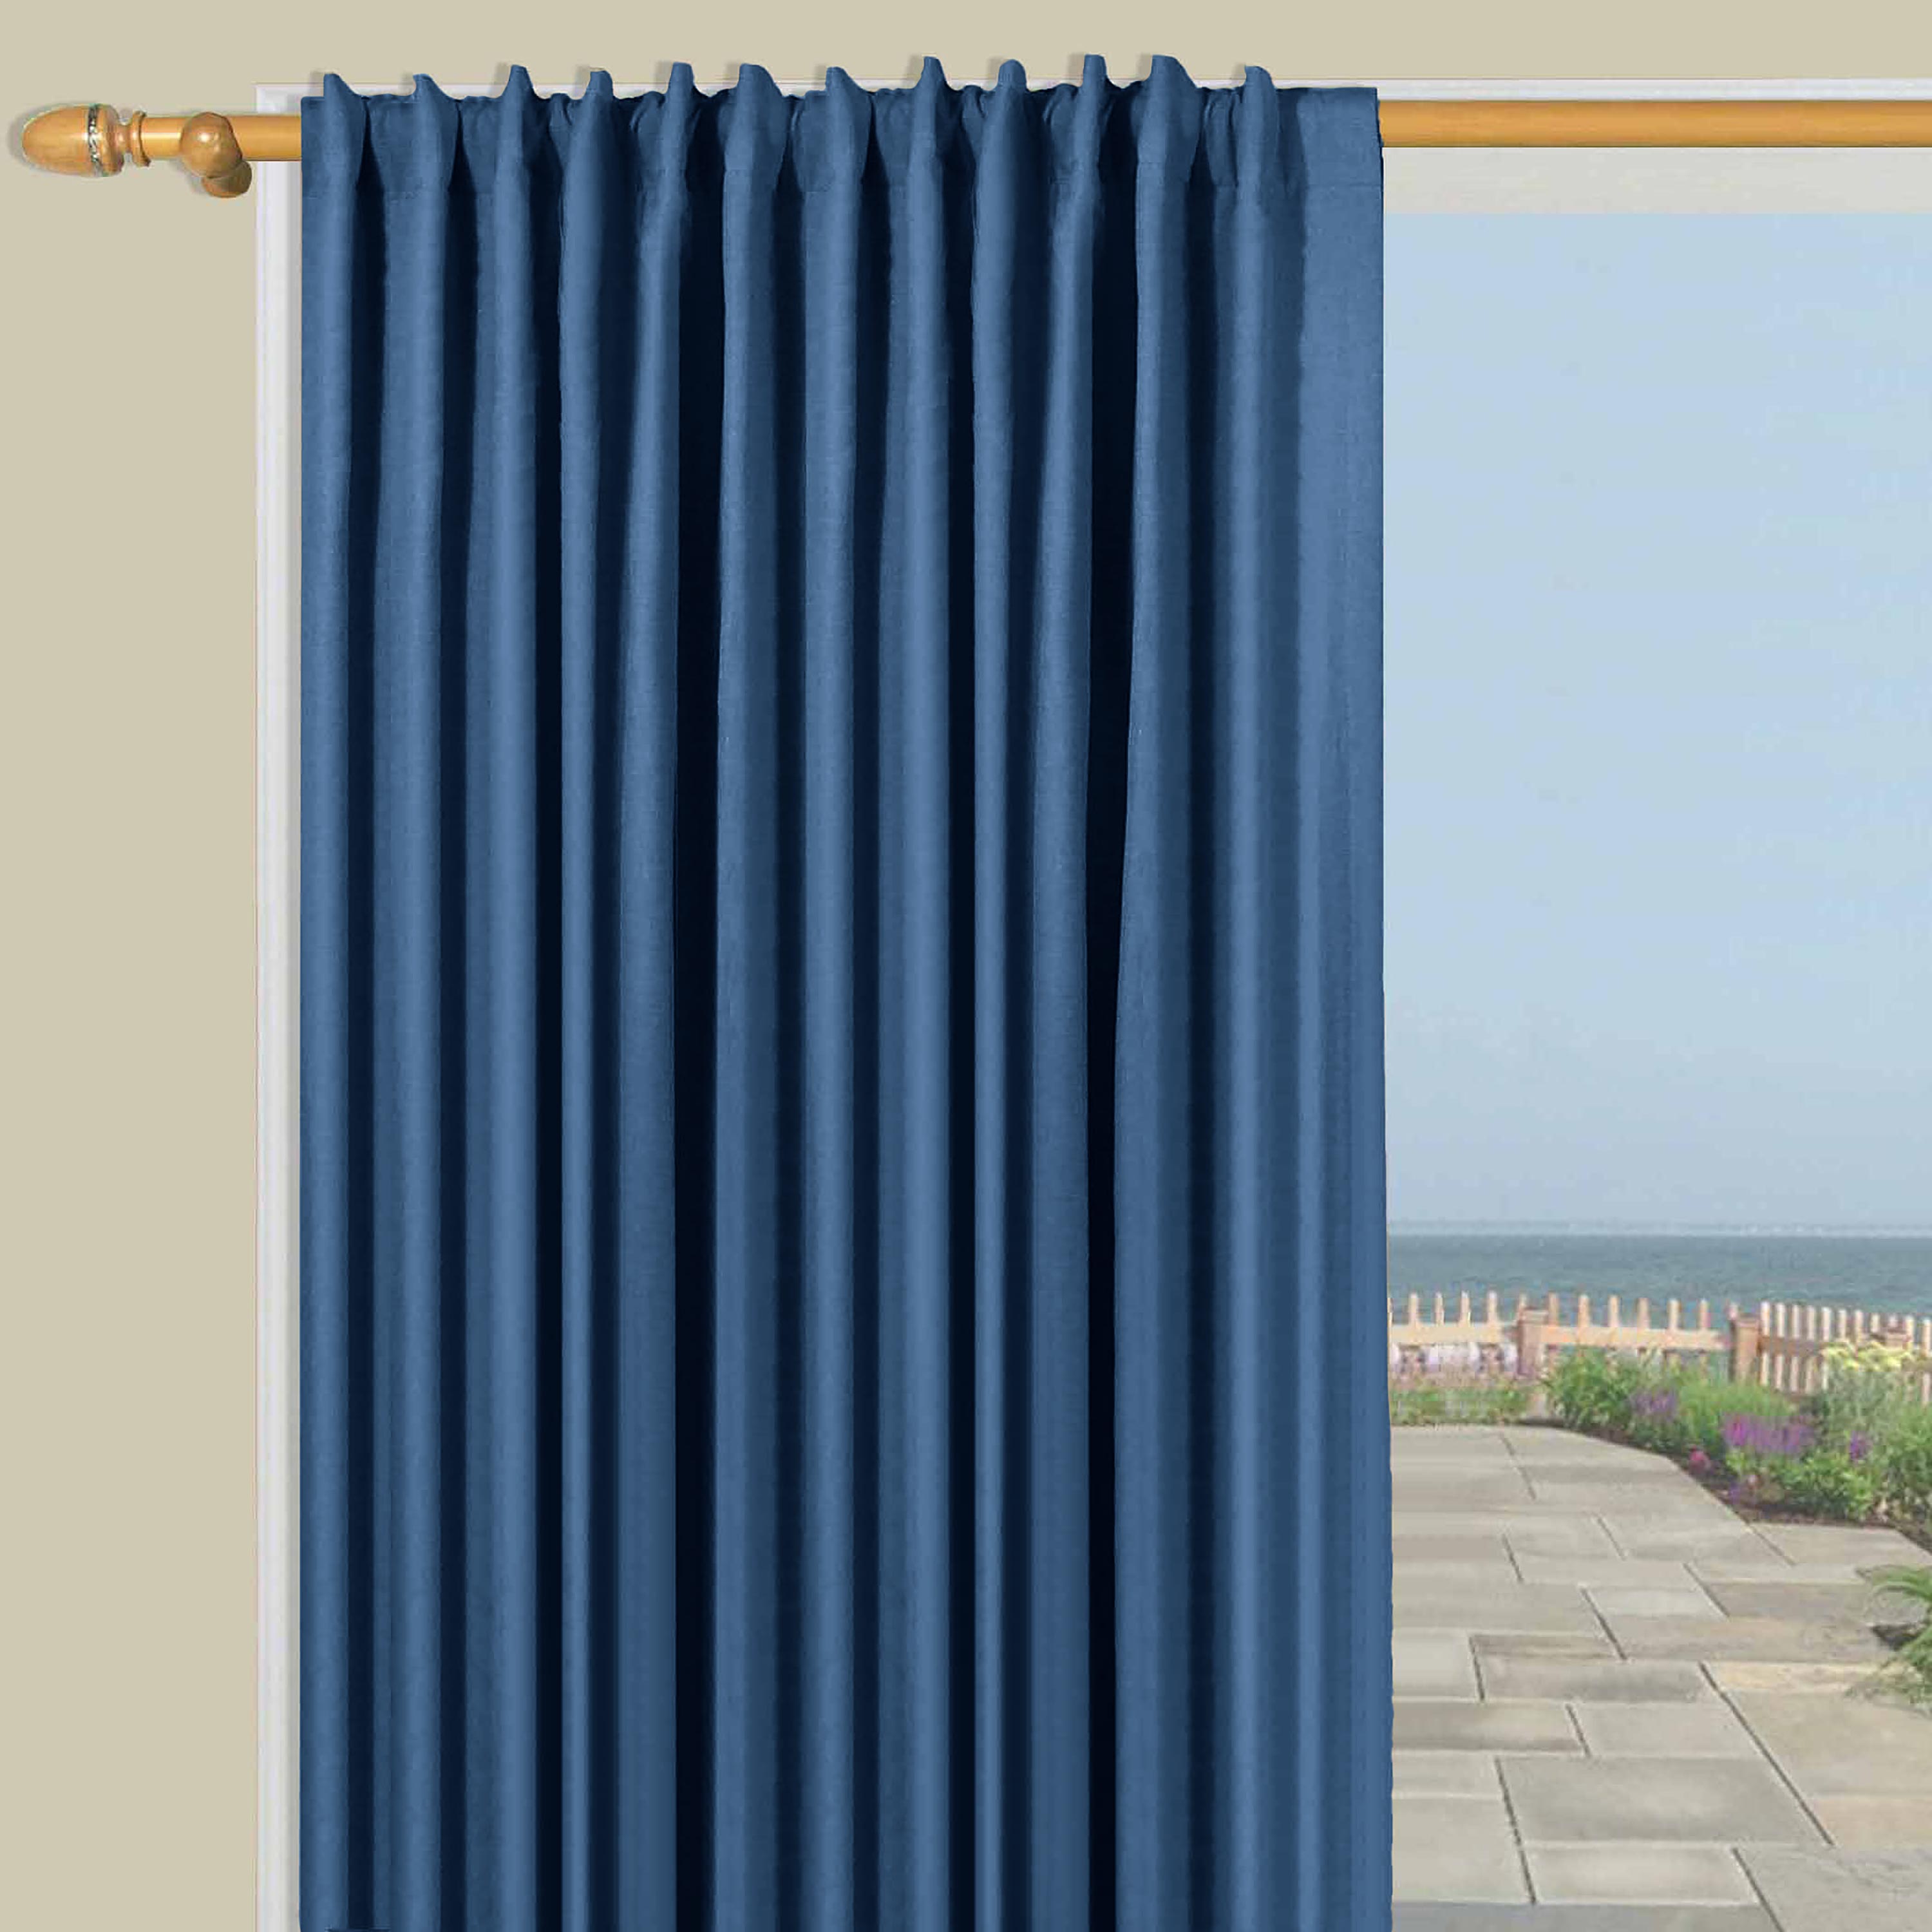 Homespun Double-Wide Rod Pocket Patio Panel with Wand, 84"L x 80"W